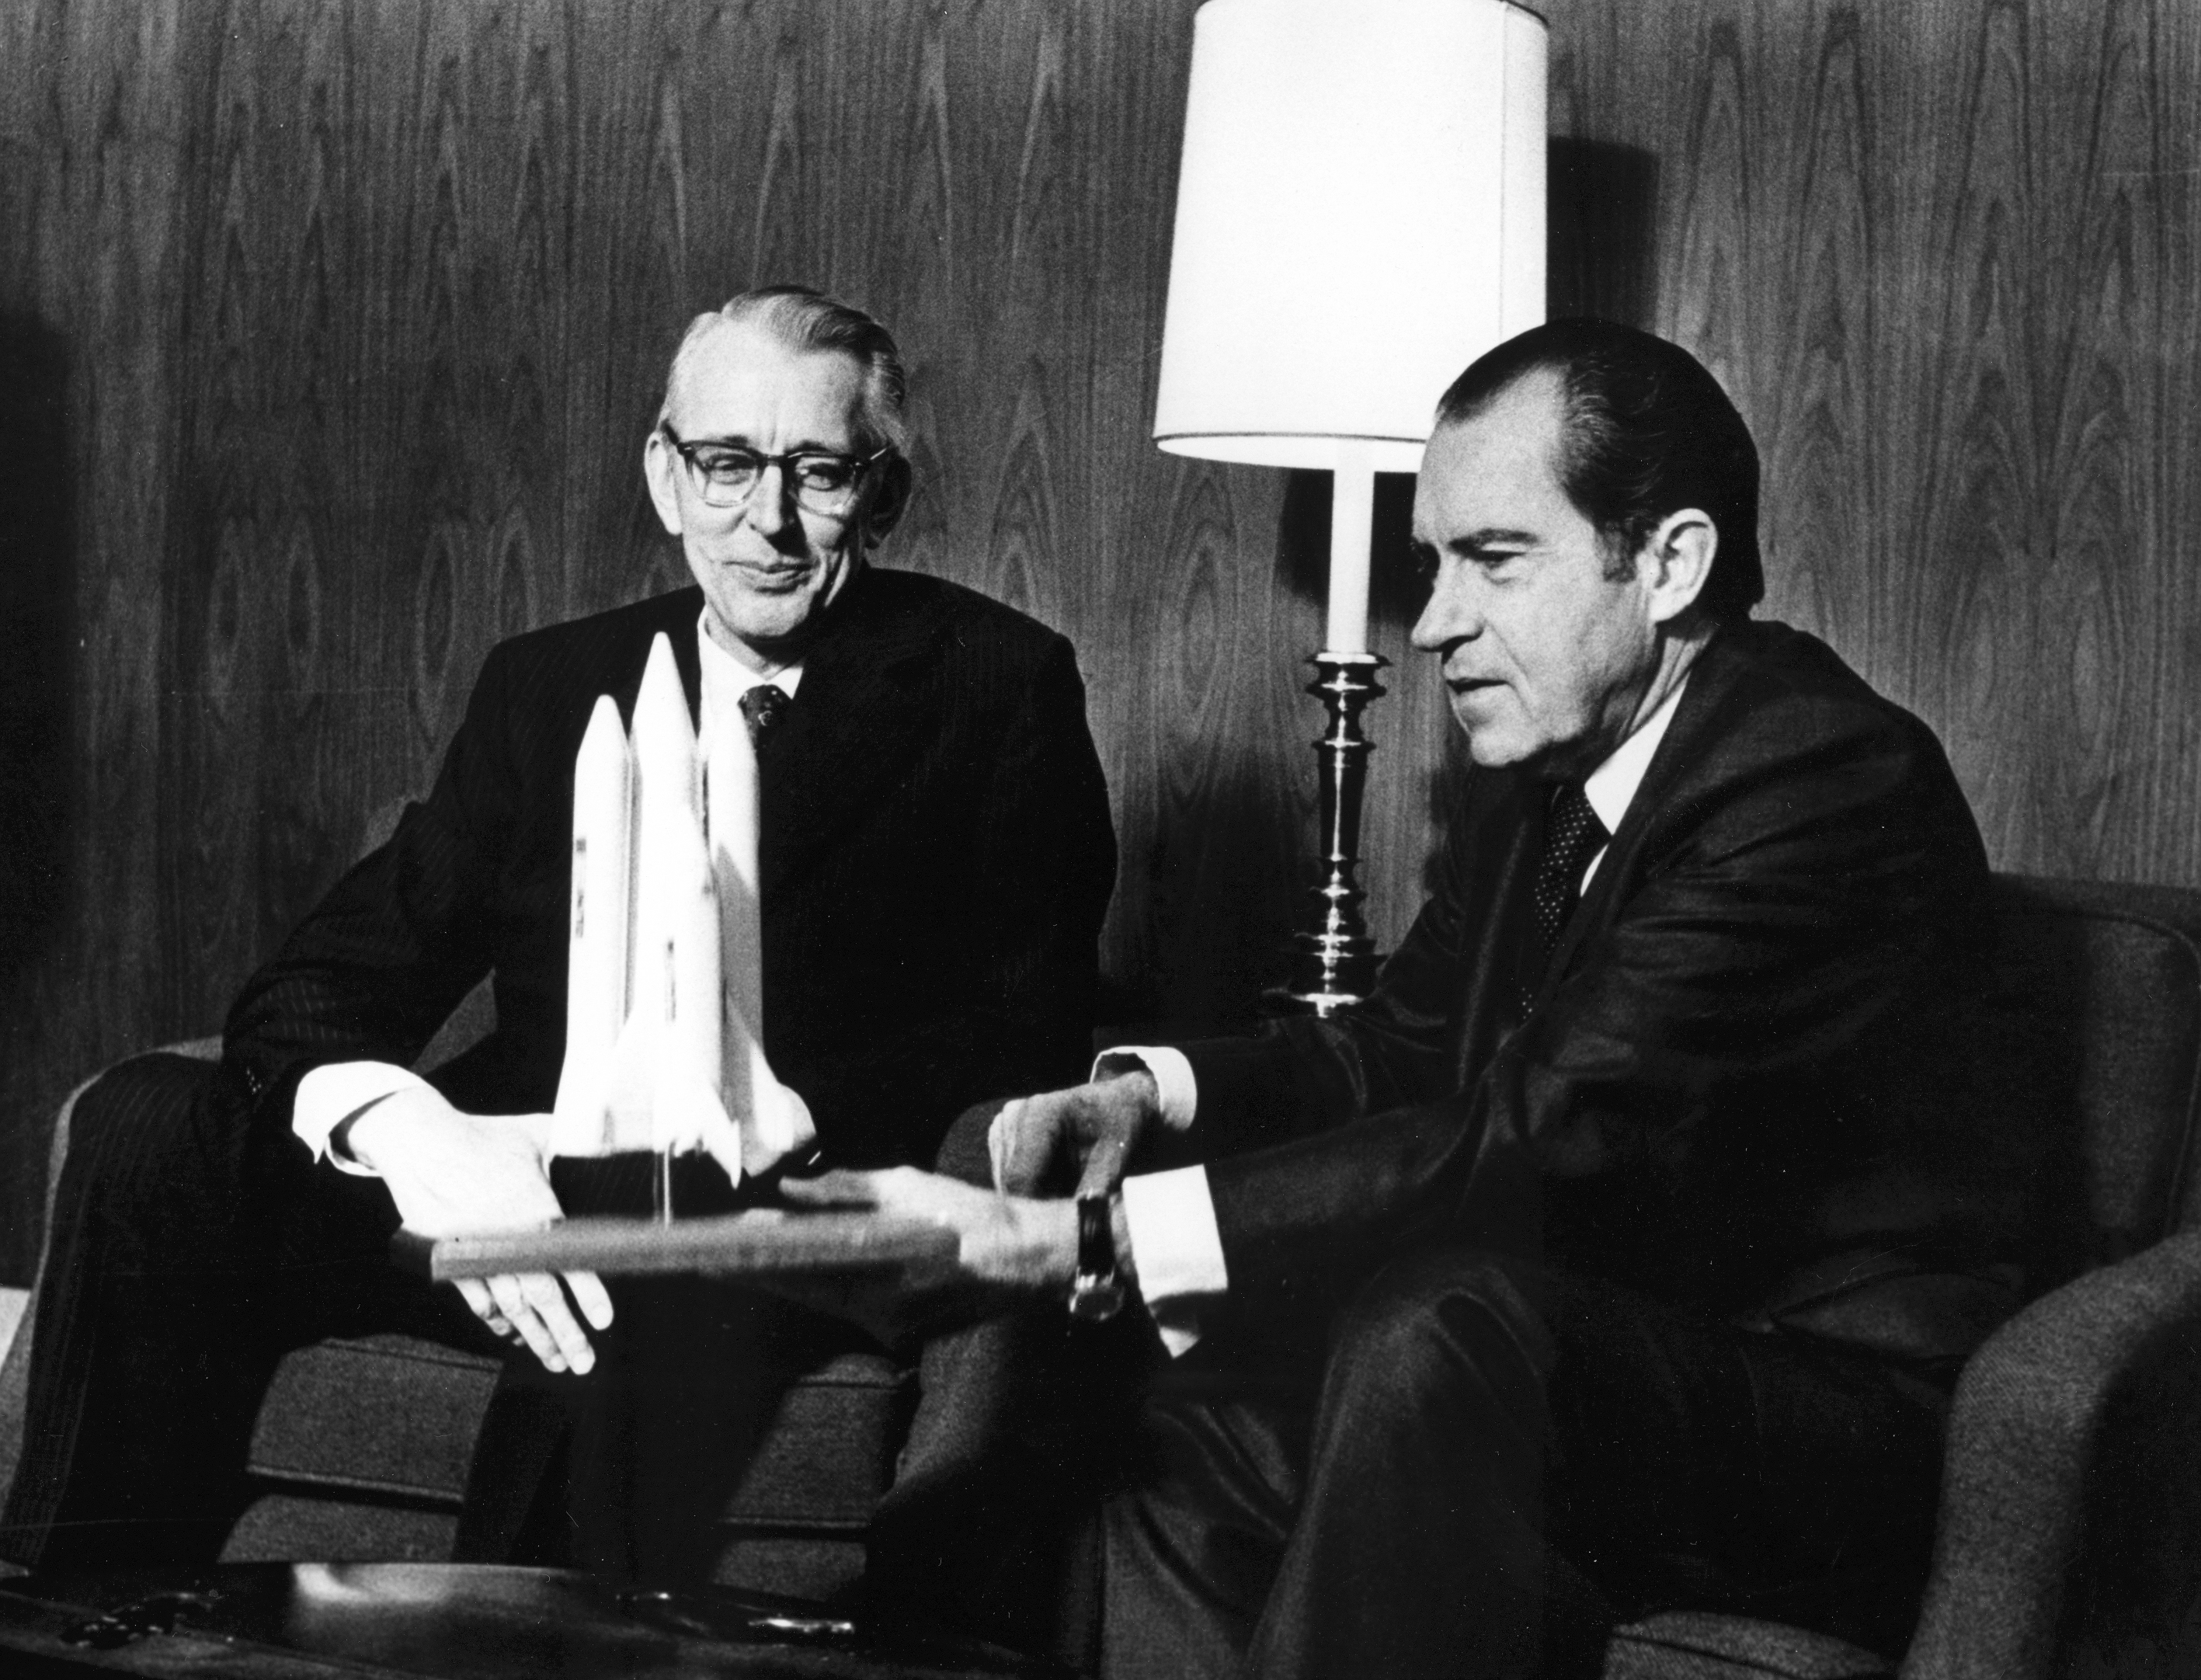 NASA Administrator James C. Fletcher, left, presents President Richard M. Nixon with a model of the space shuttle in January 1972